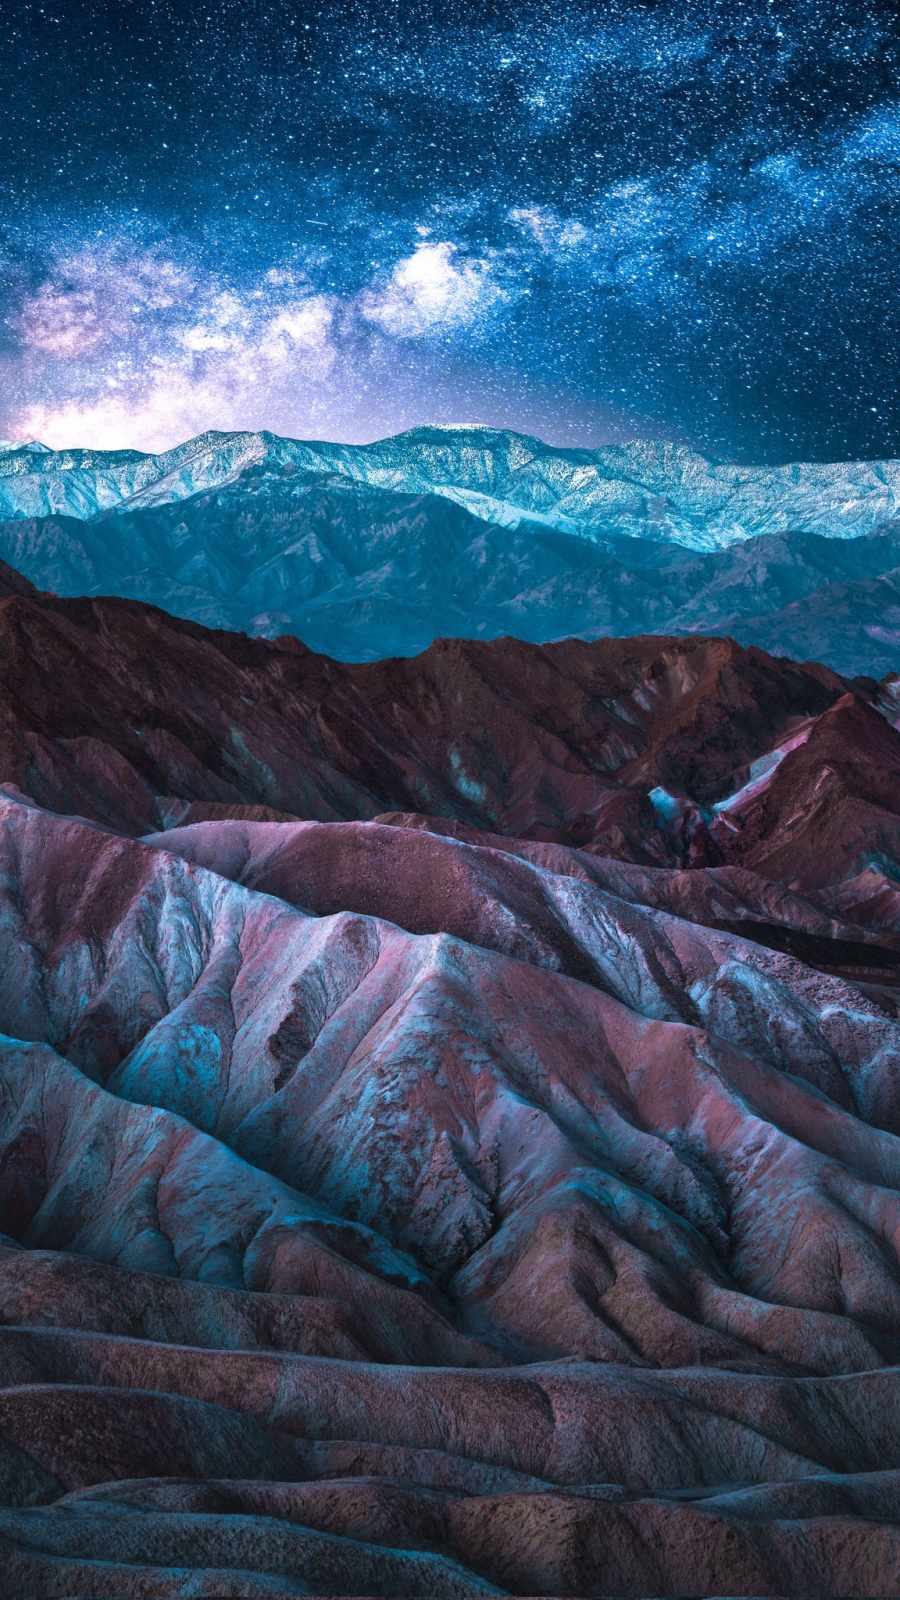 Night Mountains IPhone Wallpaper - IPhone Wallpapers : iPhone Wallpapers